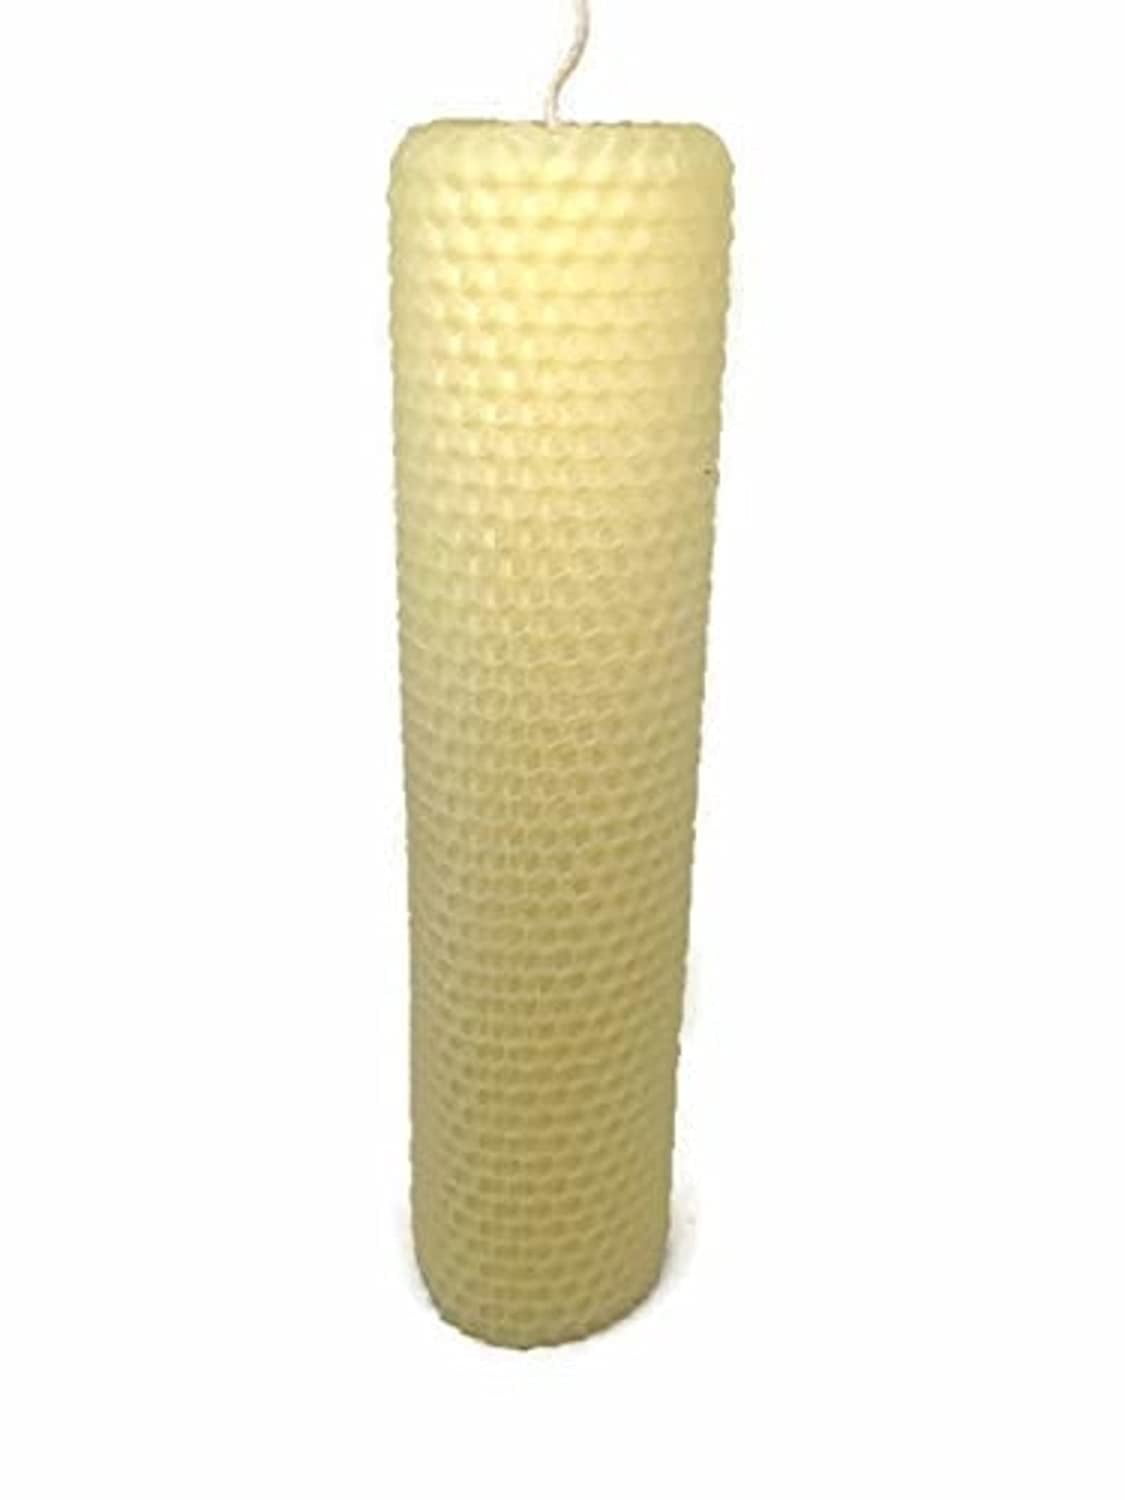 4 Pure Beeswax Rolled Pillar Candle